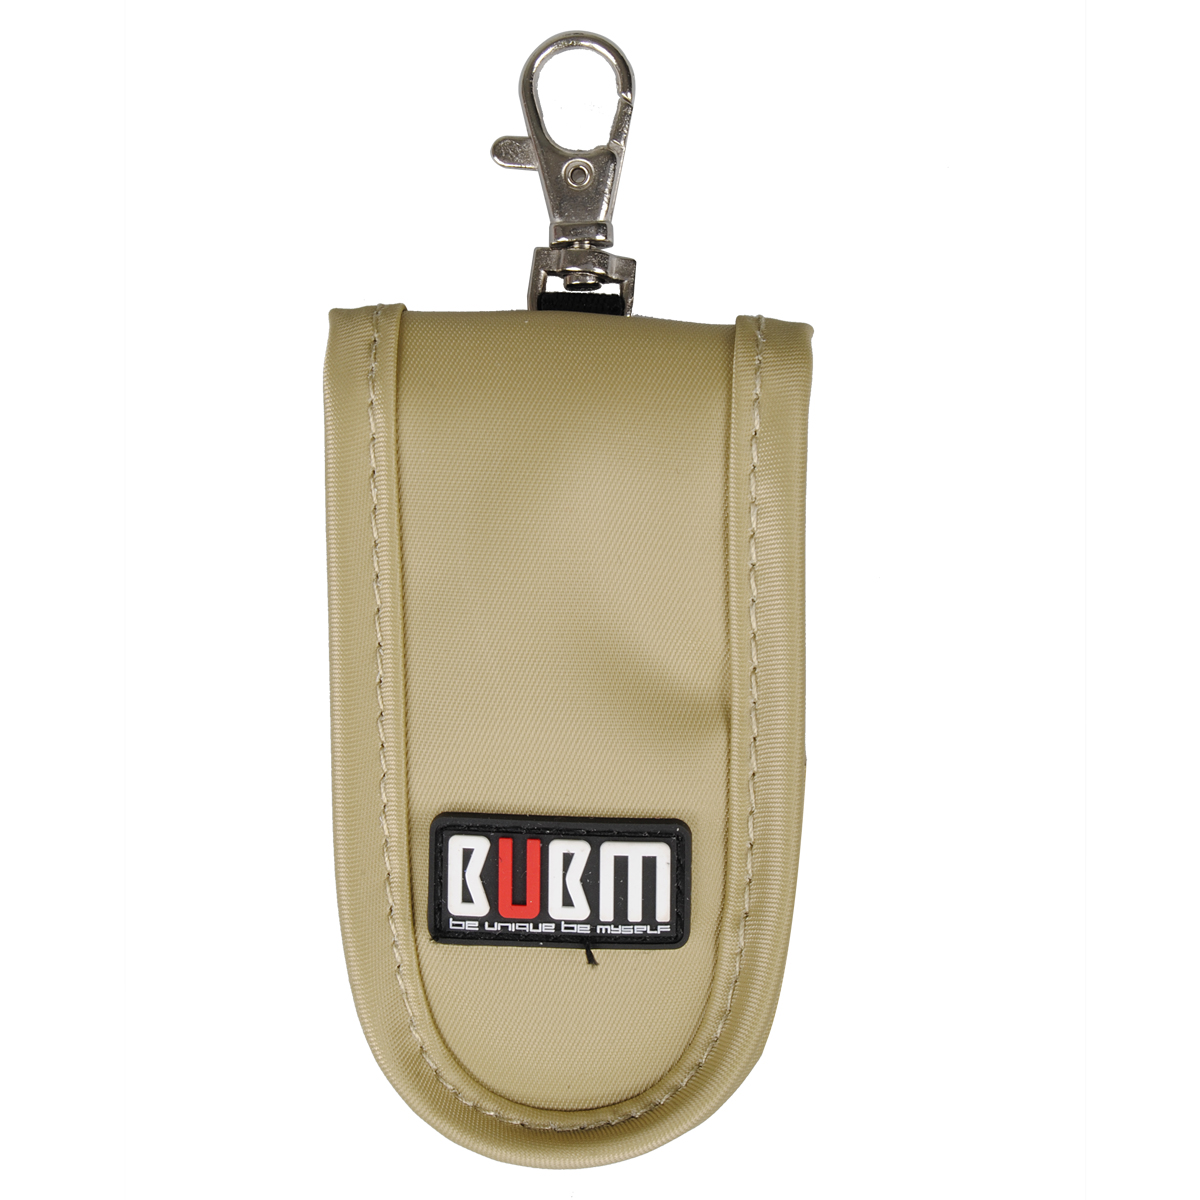 Find BUBM 2PCS Portable U Disk Card Reader Flash Drive Storage Bag Pack for Sale on Gipsybee.com with cryptocurrencies